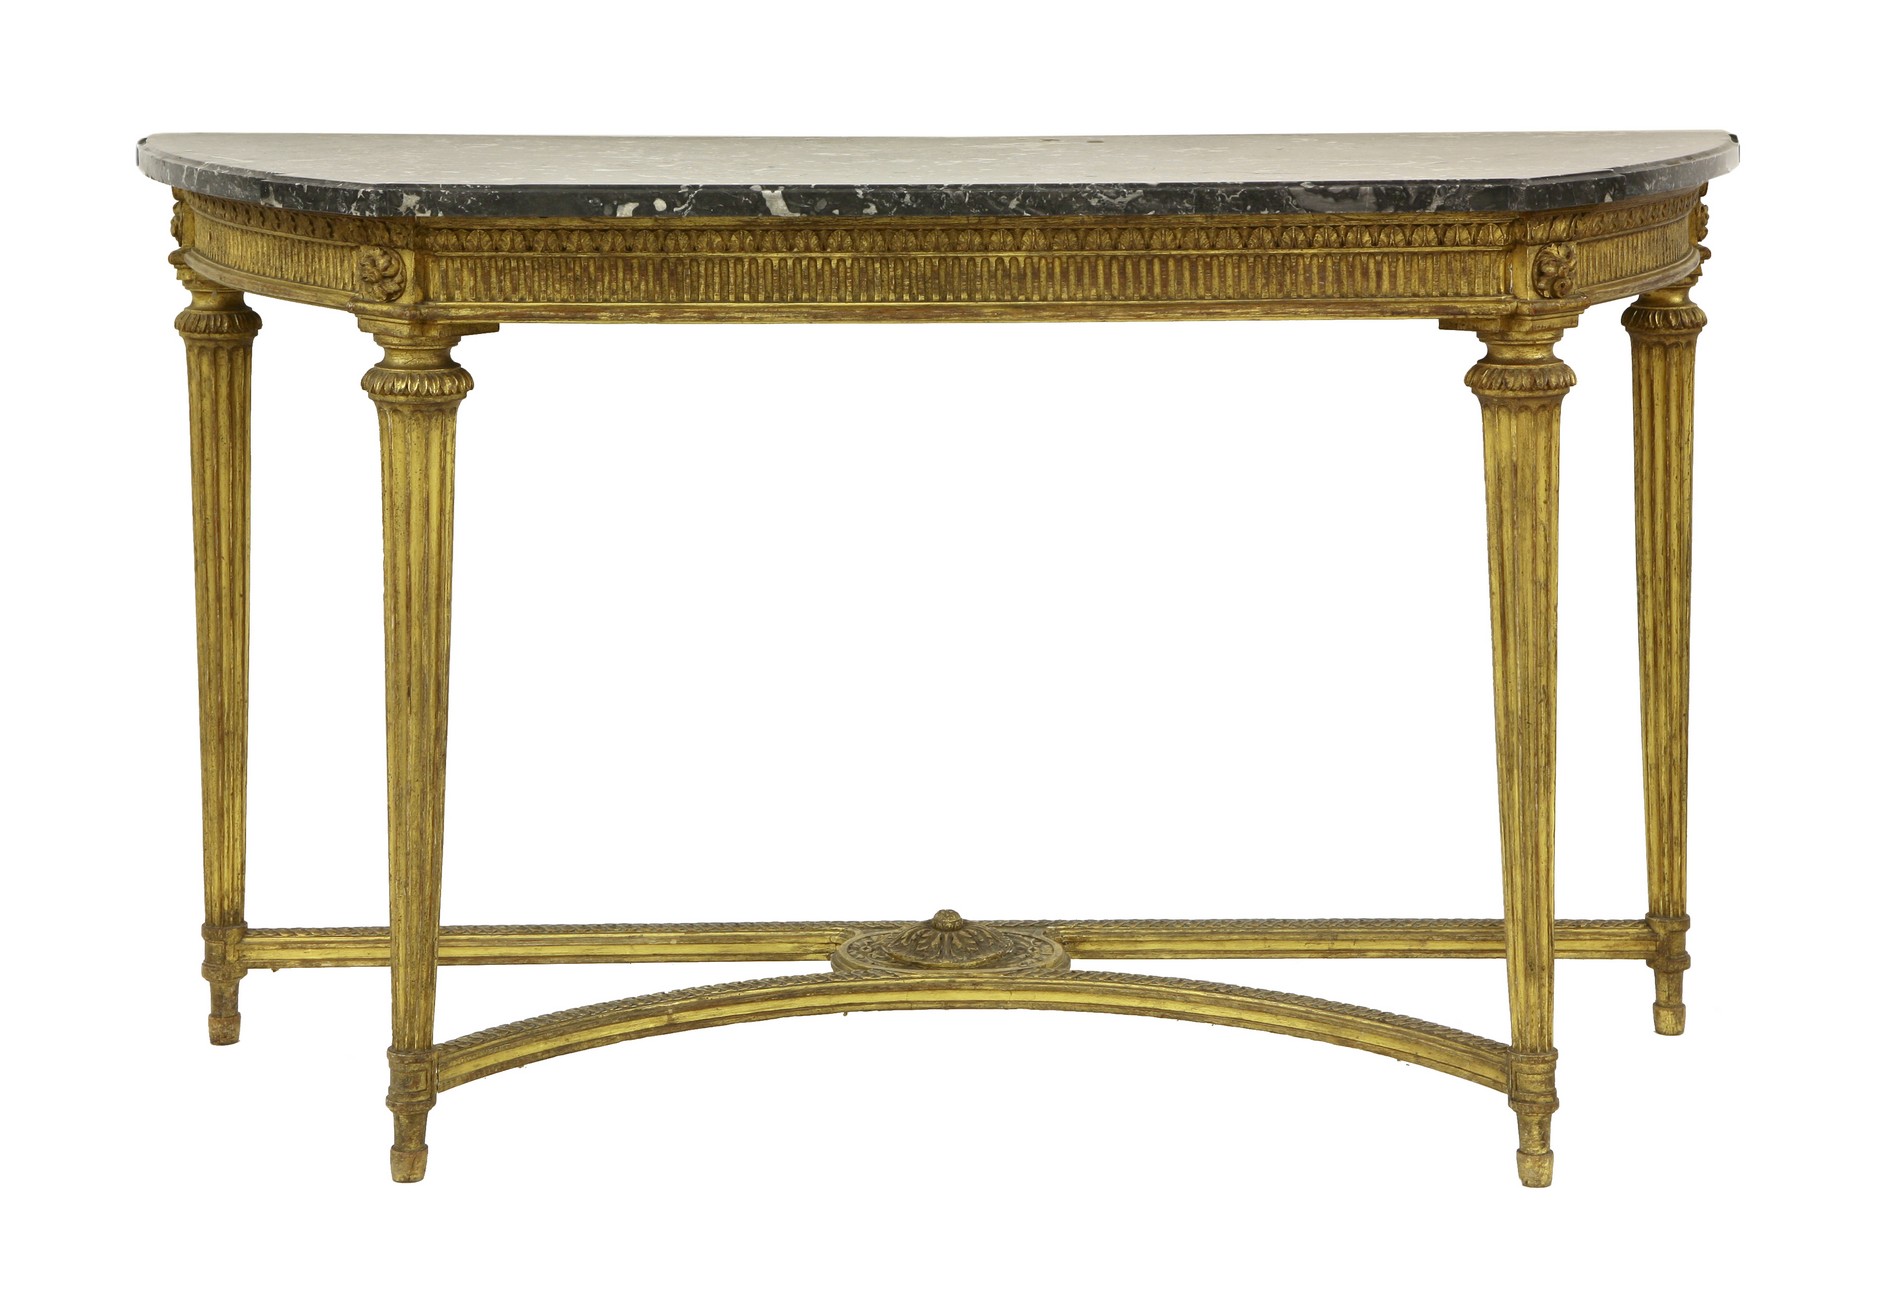 A matched pair of French neoclassical pier tables,
one c.1780 and one c.1900, each with grey-